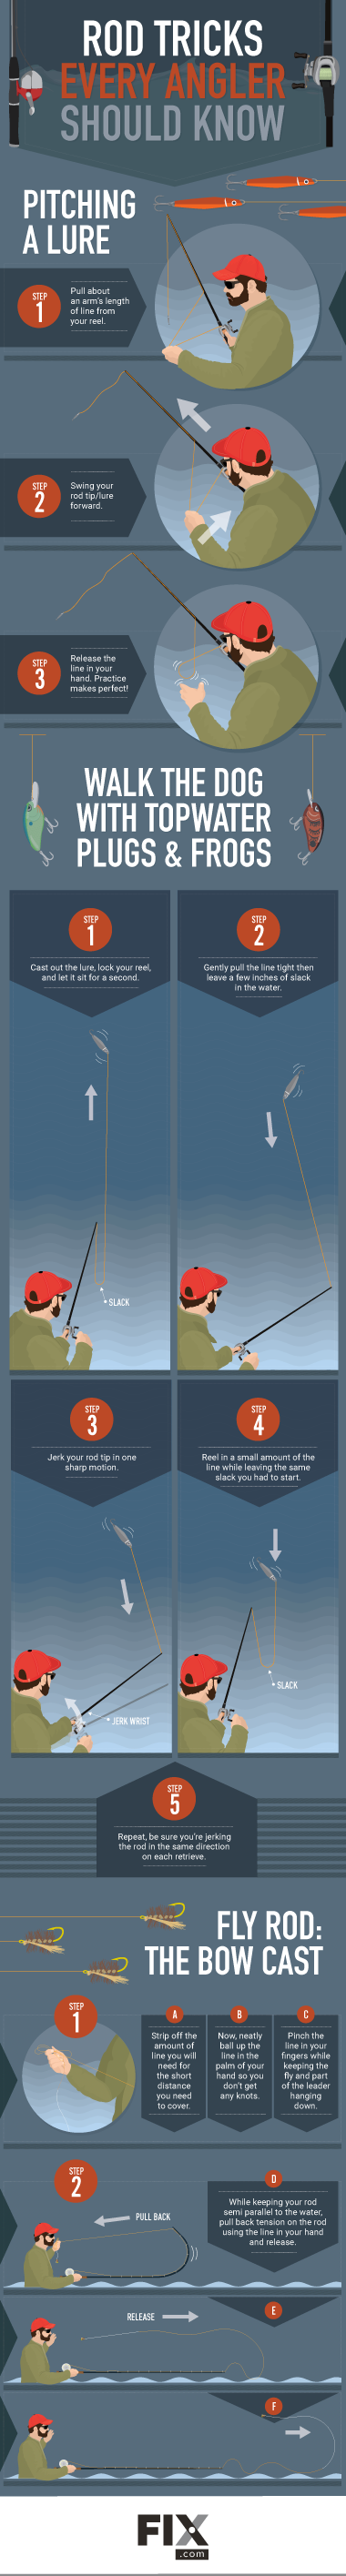 Fishing Rod Tricks For Tight Casts